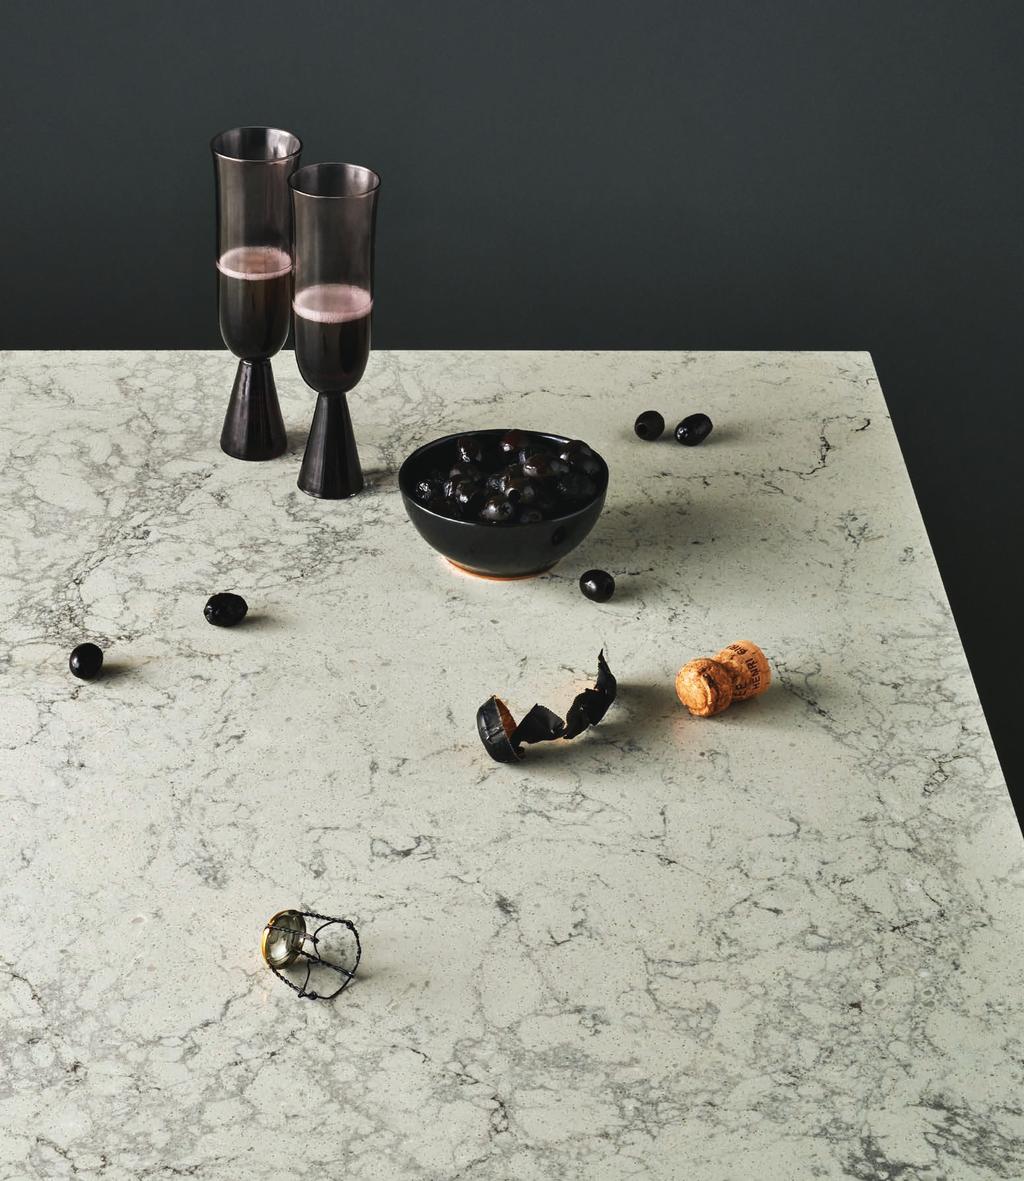 5043 Montblanc Freedom of design with seemingly endless application possibilities Caesarstone quartz beauty and strength combined Quartz is more than beautiful.